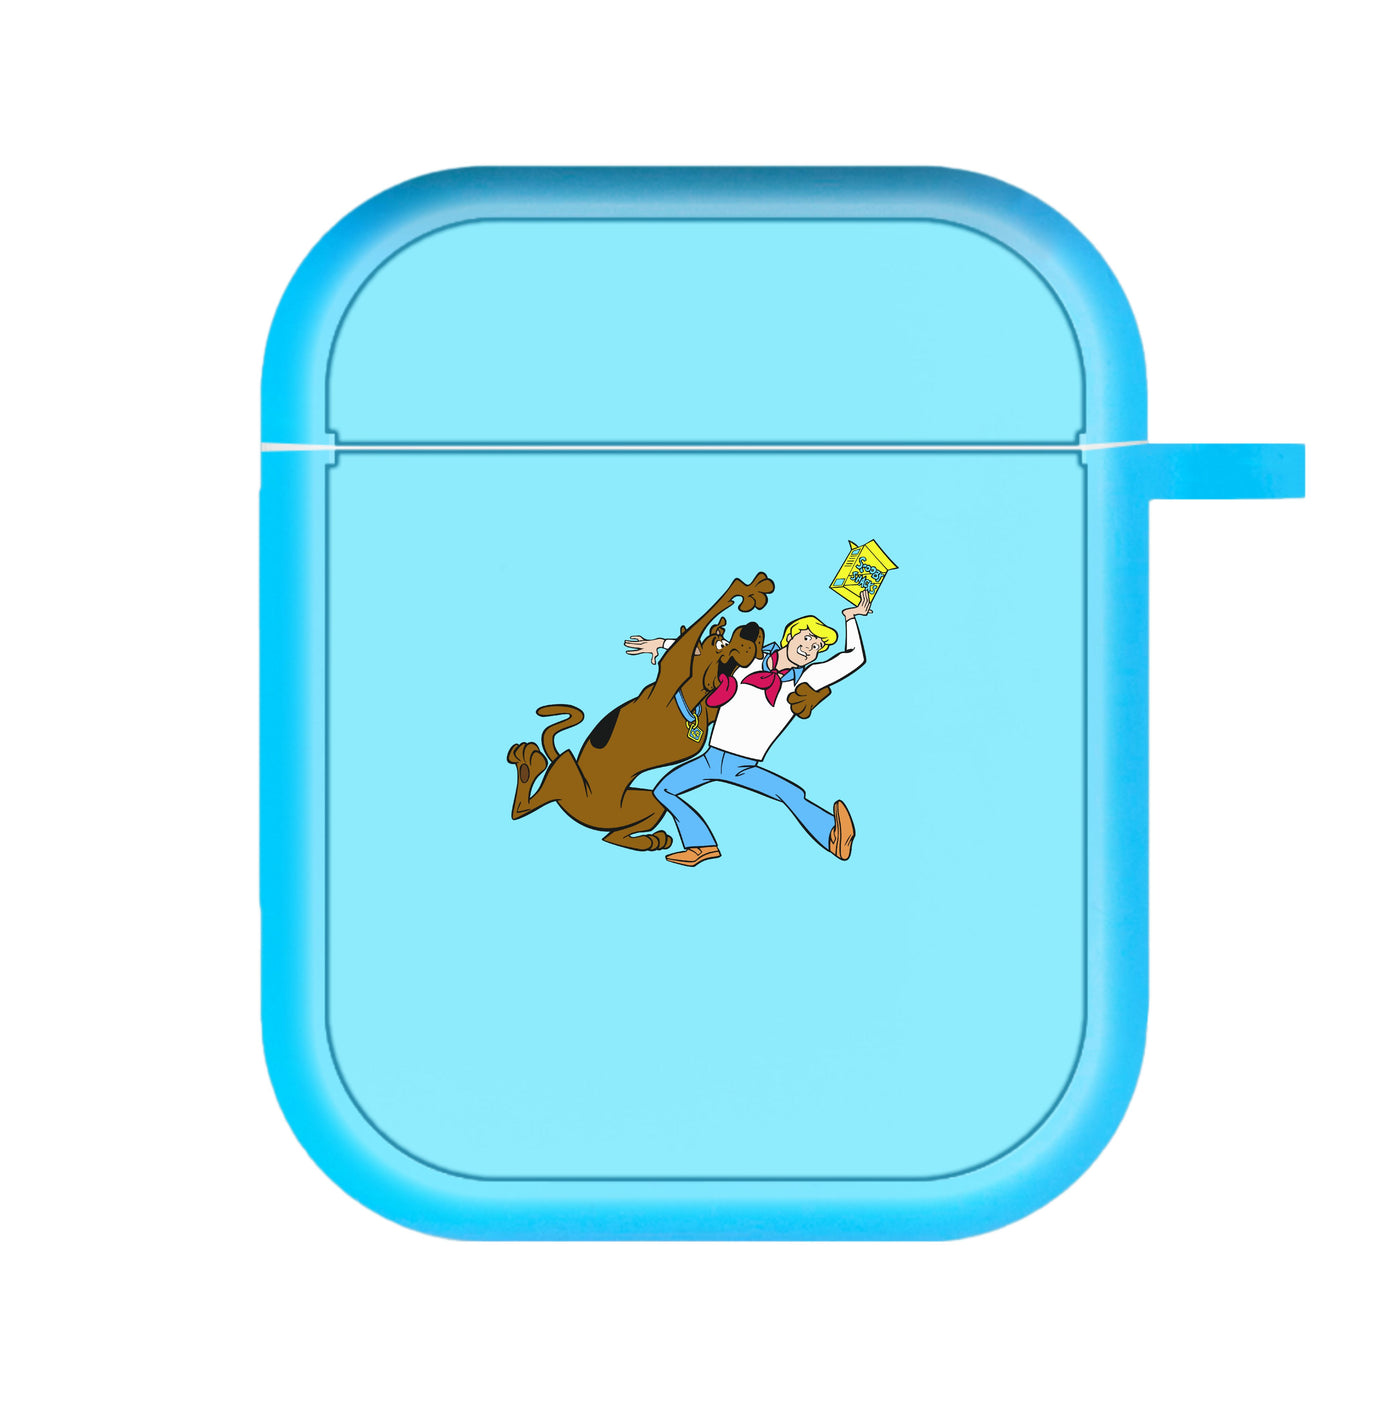 Scooby Snacks - Scooby Doo AirPods Case